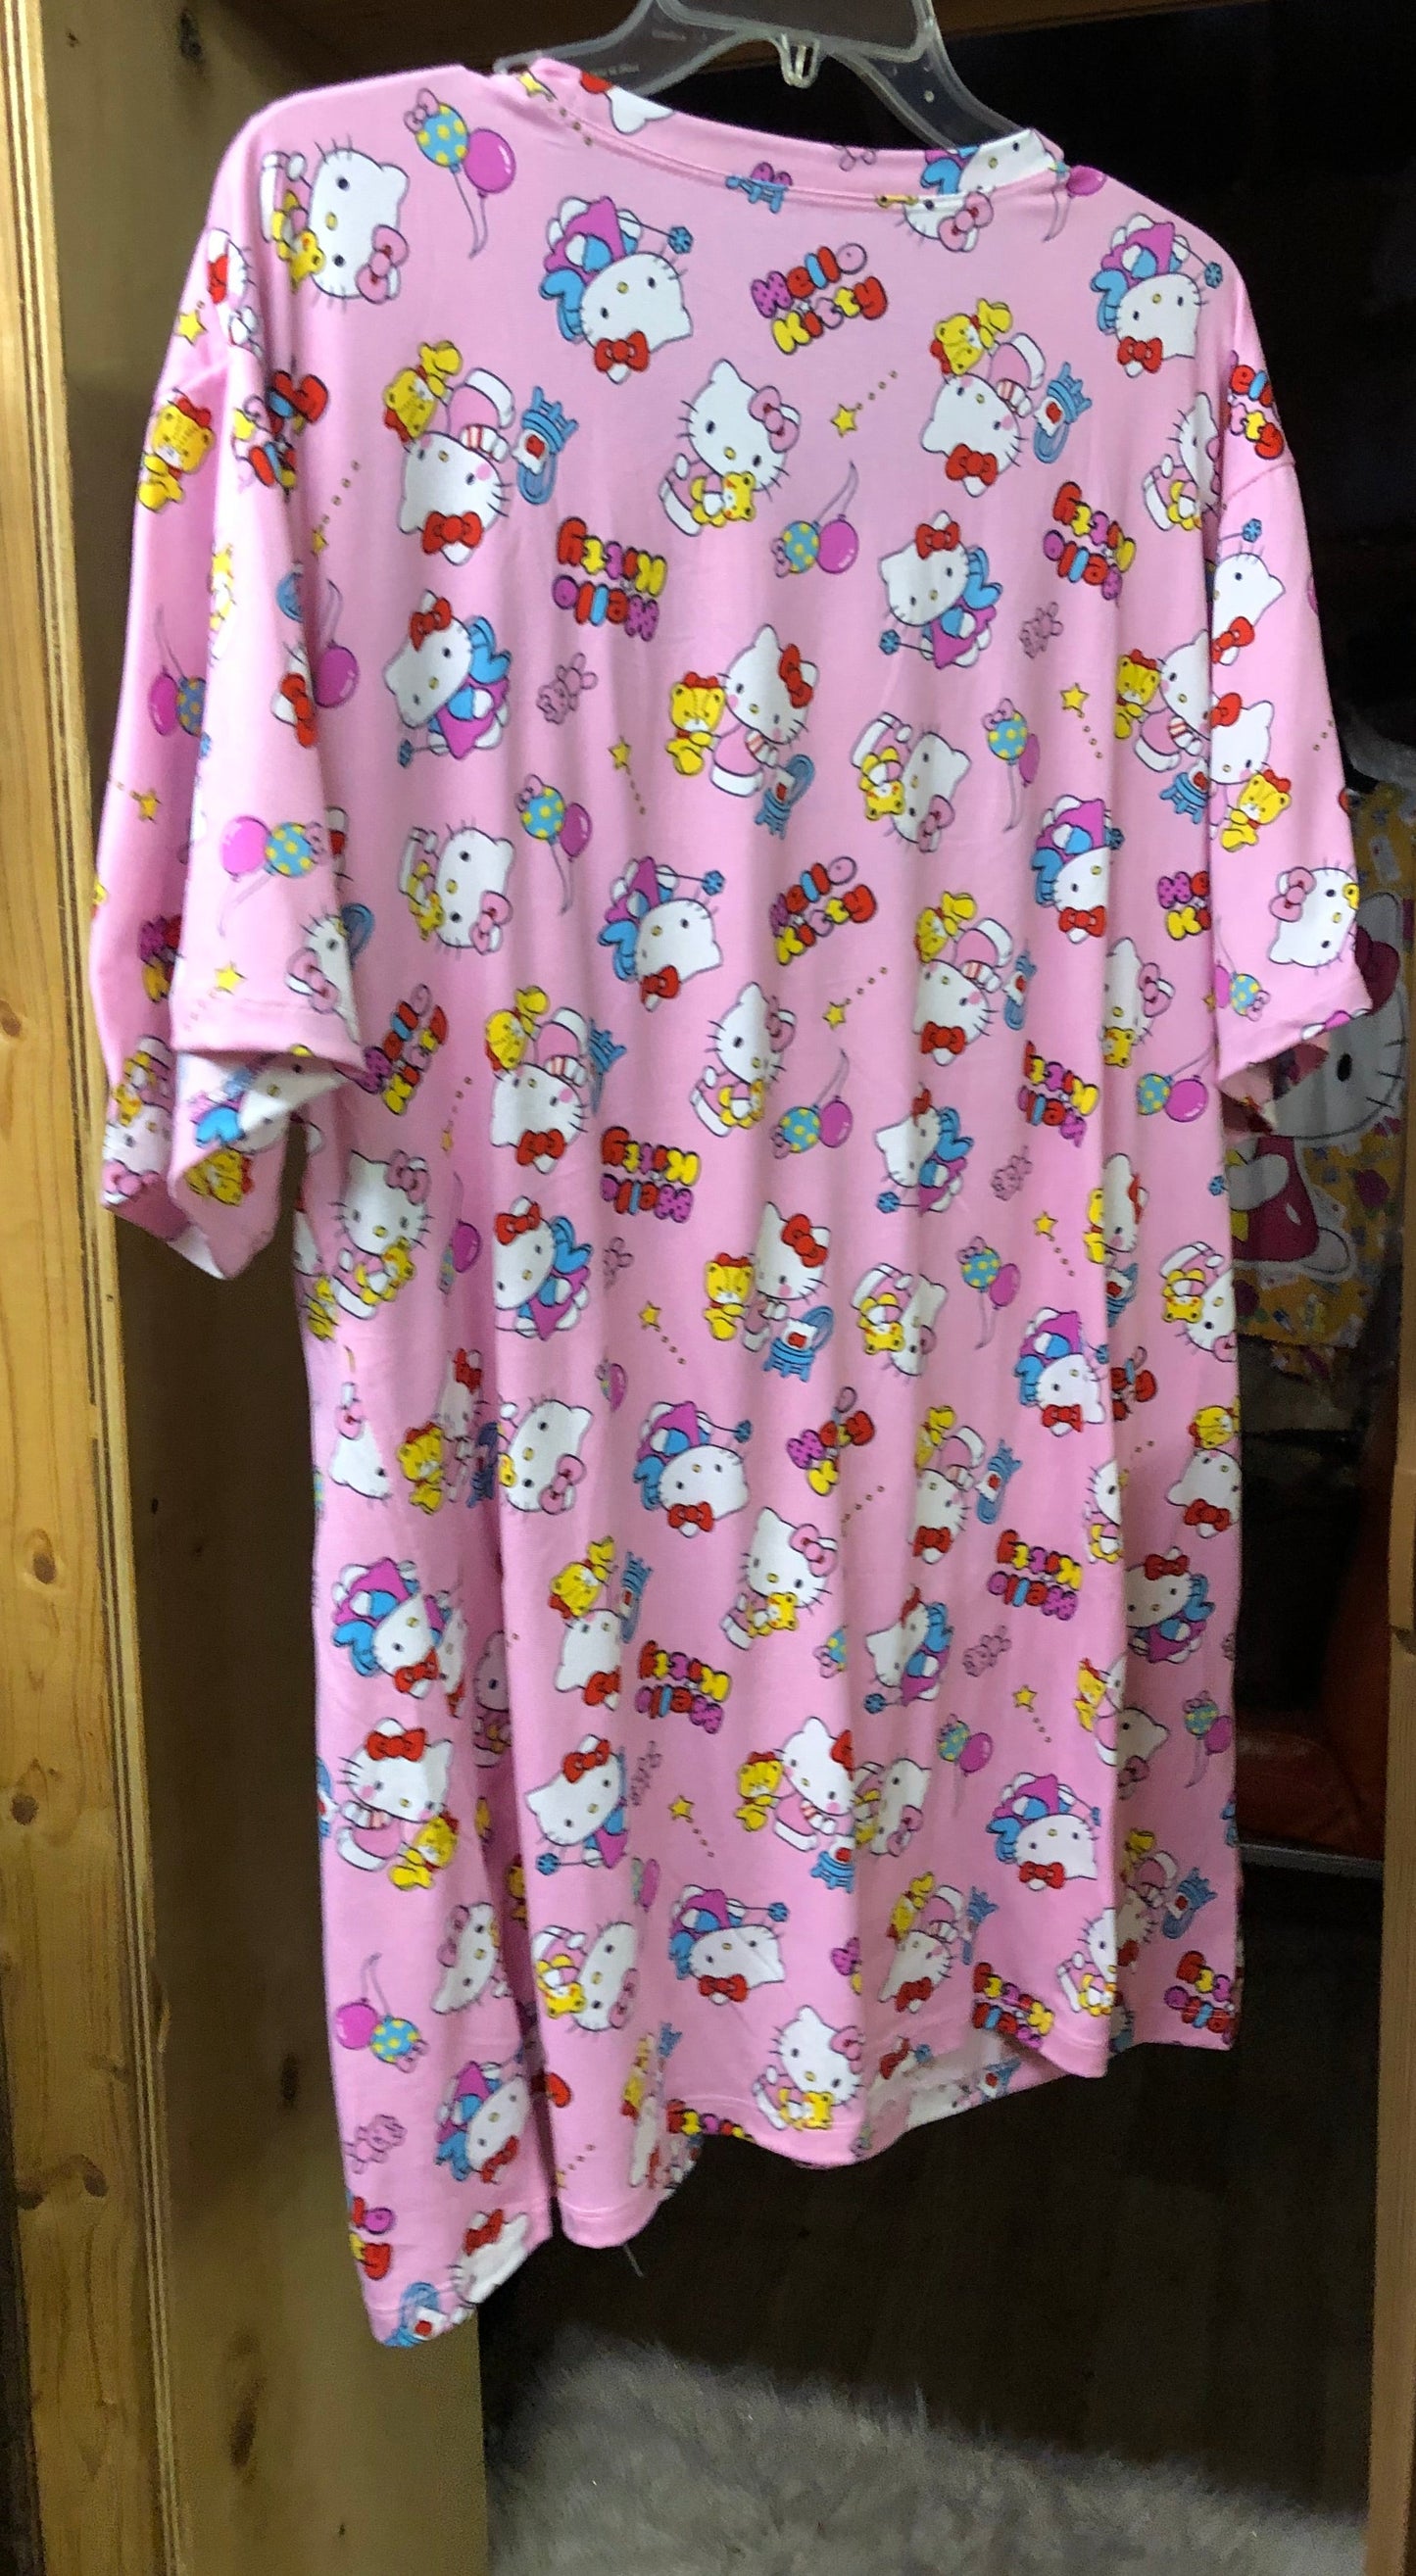 Woman Plus Size 1XL/2XL Hello Kitty Sleep Shirt Dress Color Pink "New Arrival"SOLD OUT"